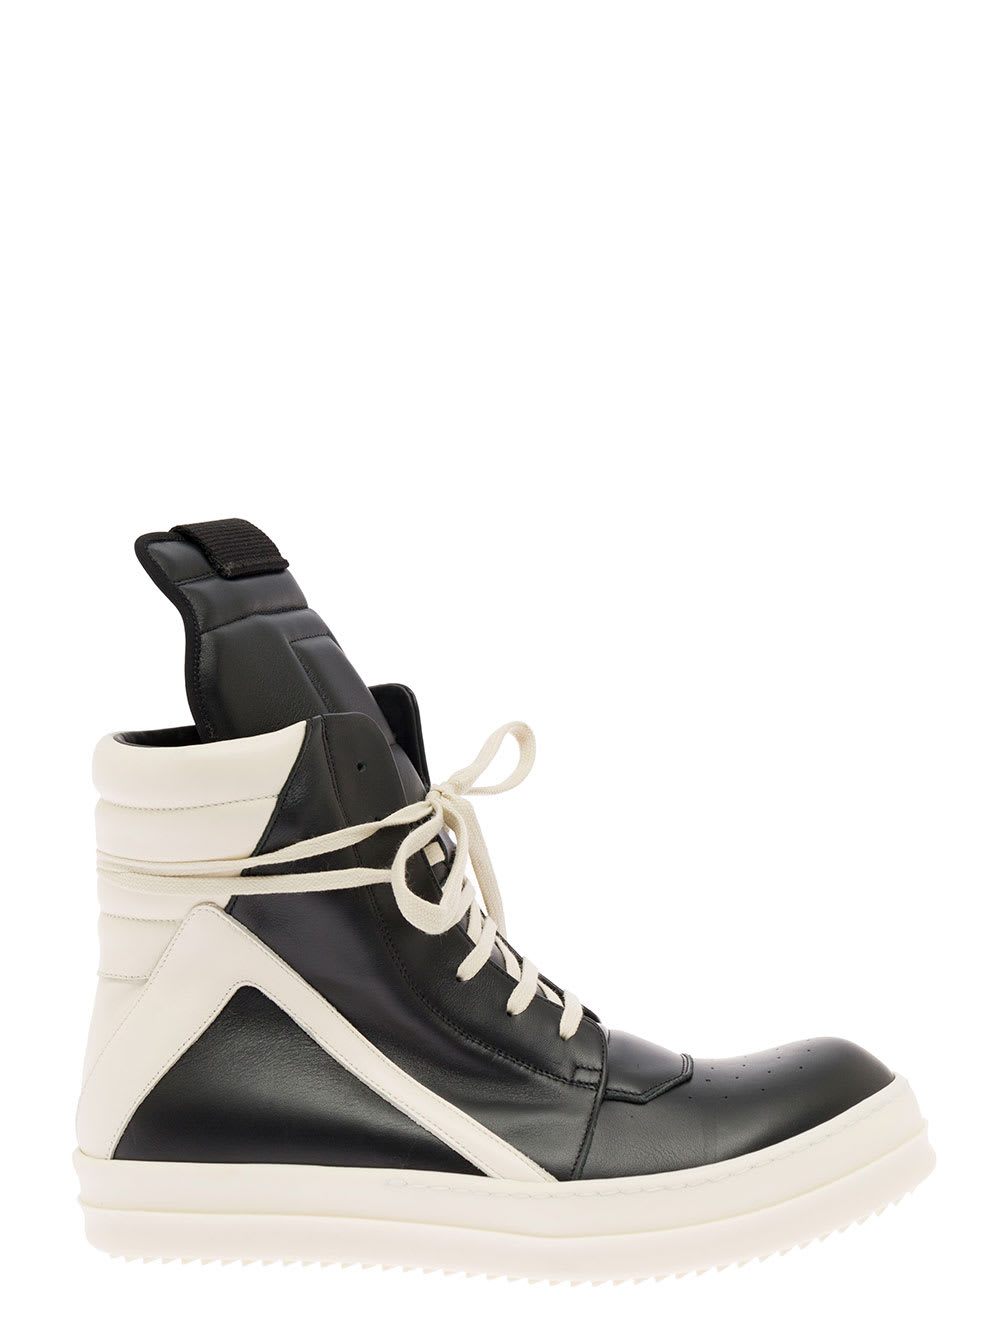 Rick Owens Mans Geobasket White And Black Leather Sneakers